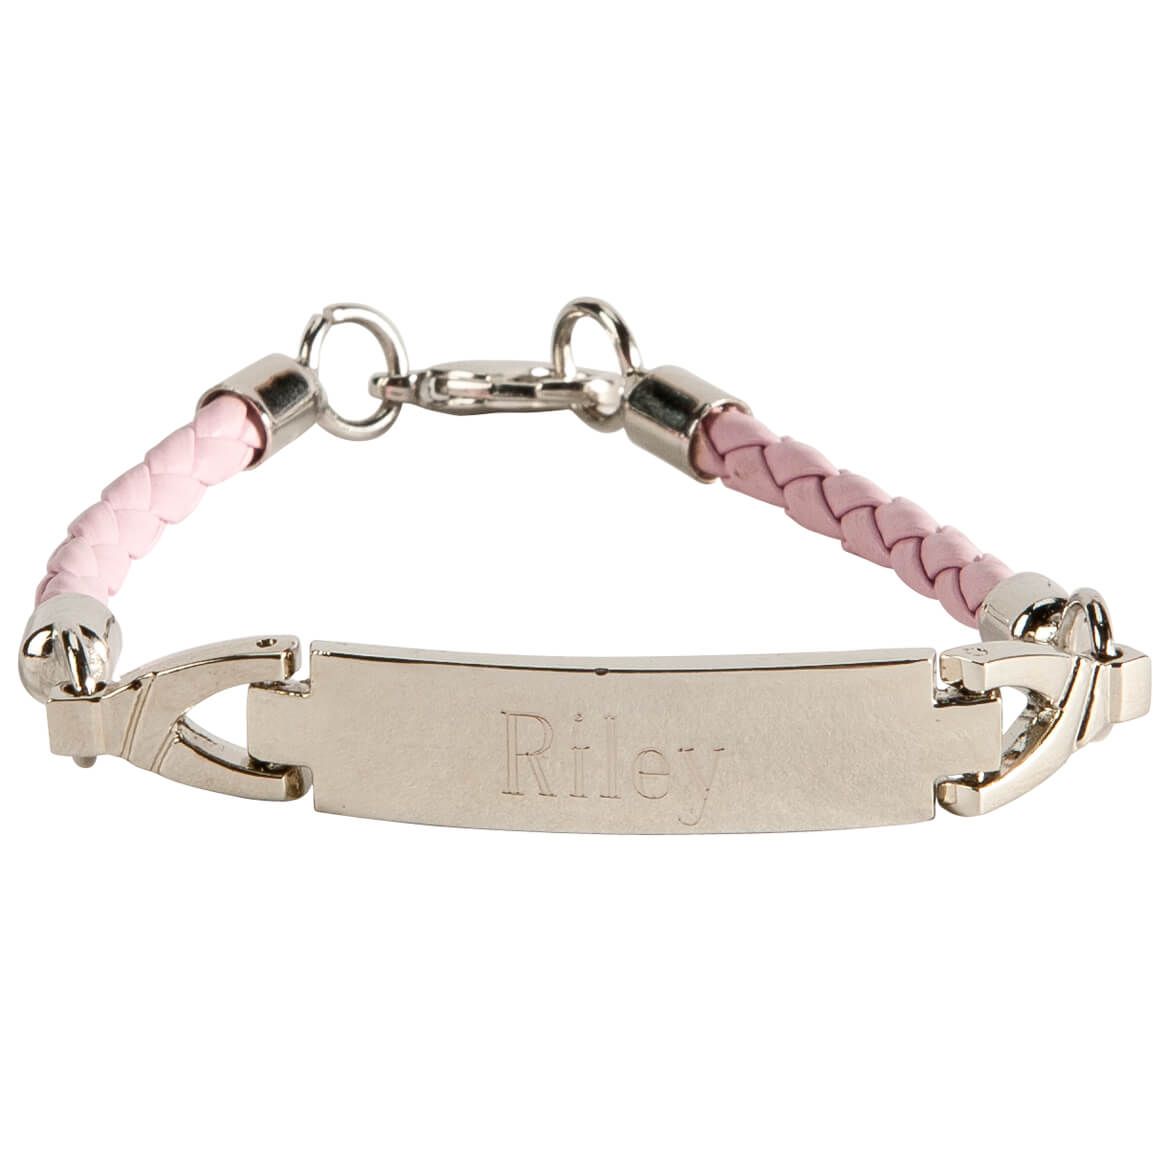 Personalized Pink Childrens ID Bracelet + '-' + 359998